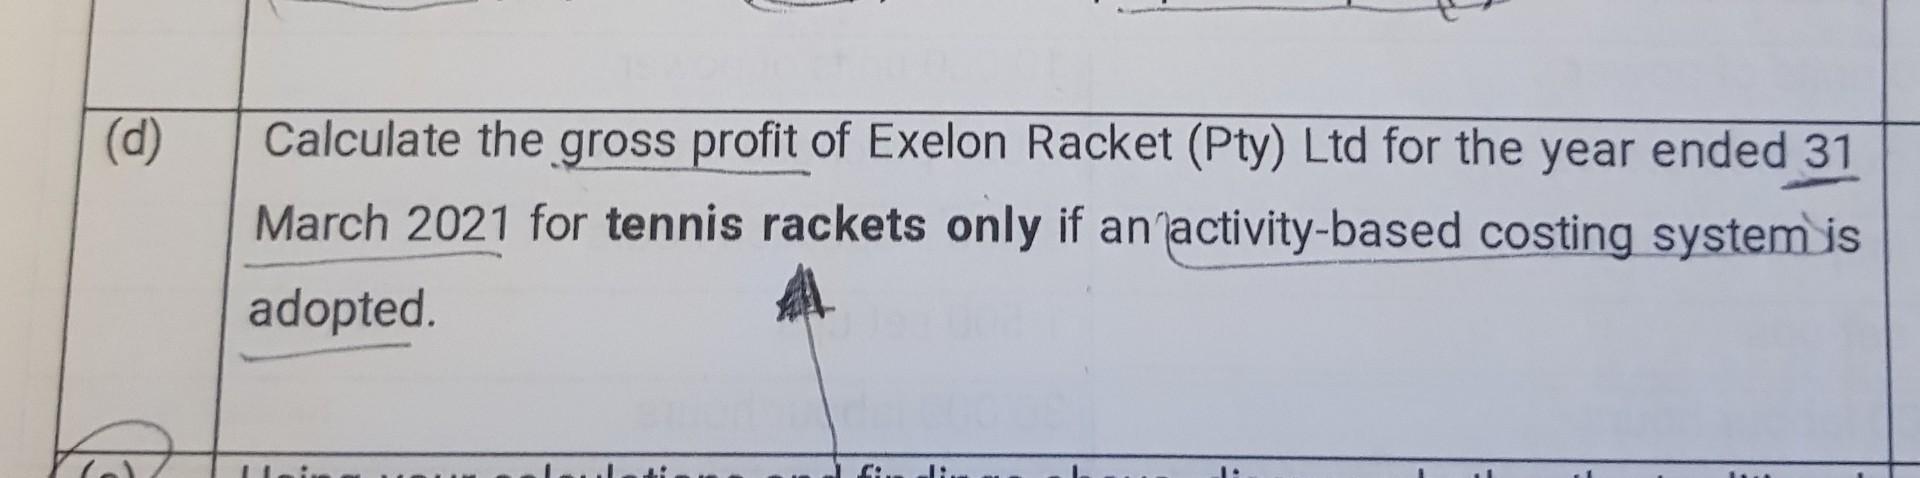 (d) Calculate the gross profit of Exelon Racket (Pty) Ltd for the year ended 31 March 2021 for tennis rackets